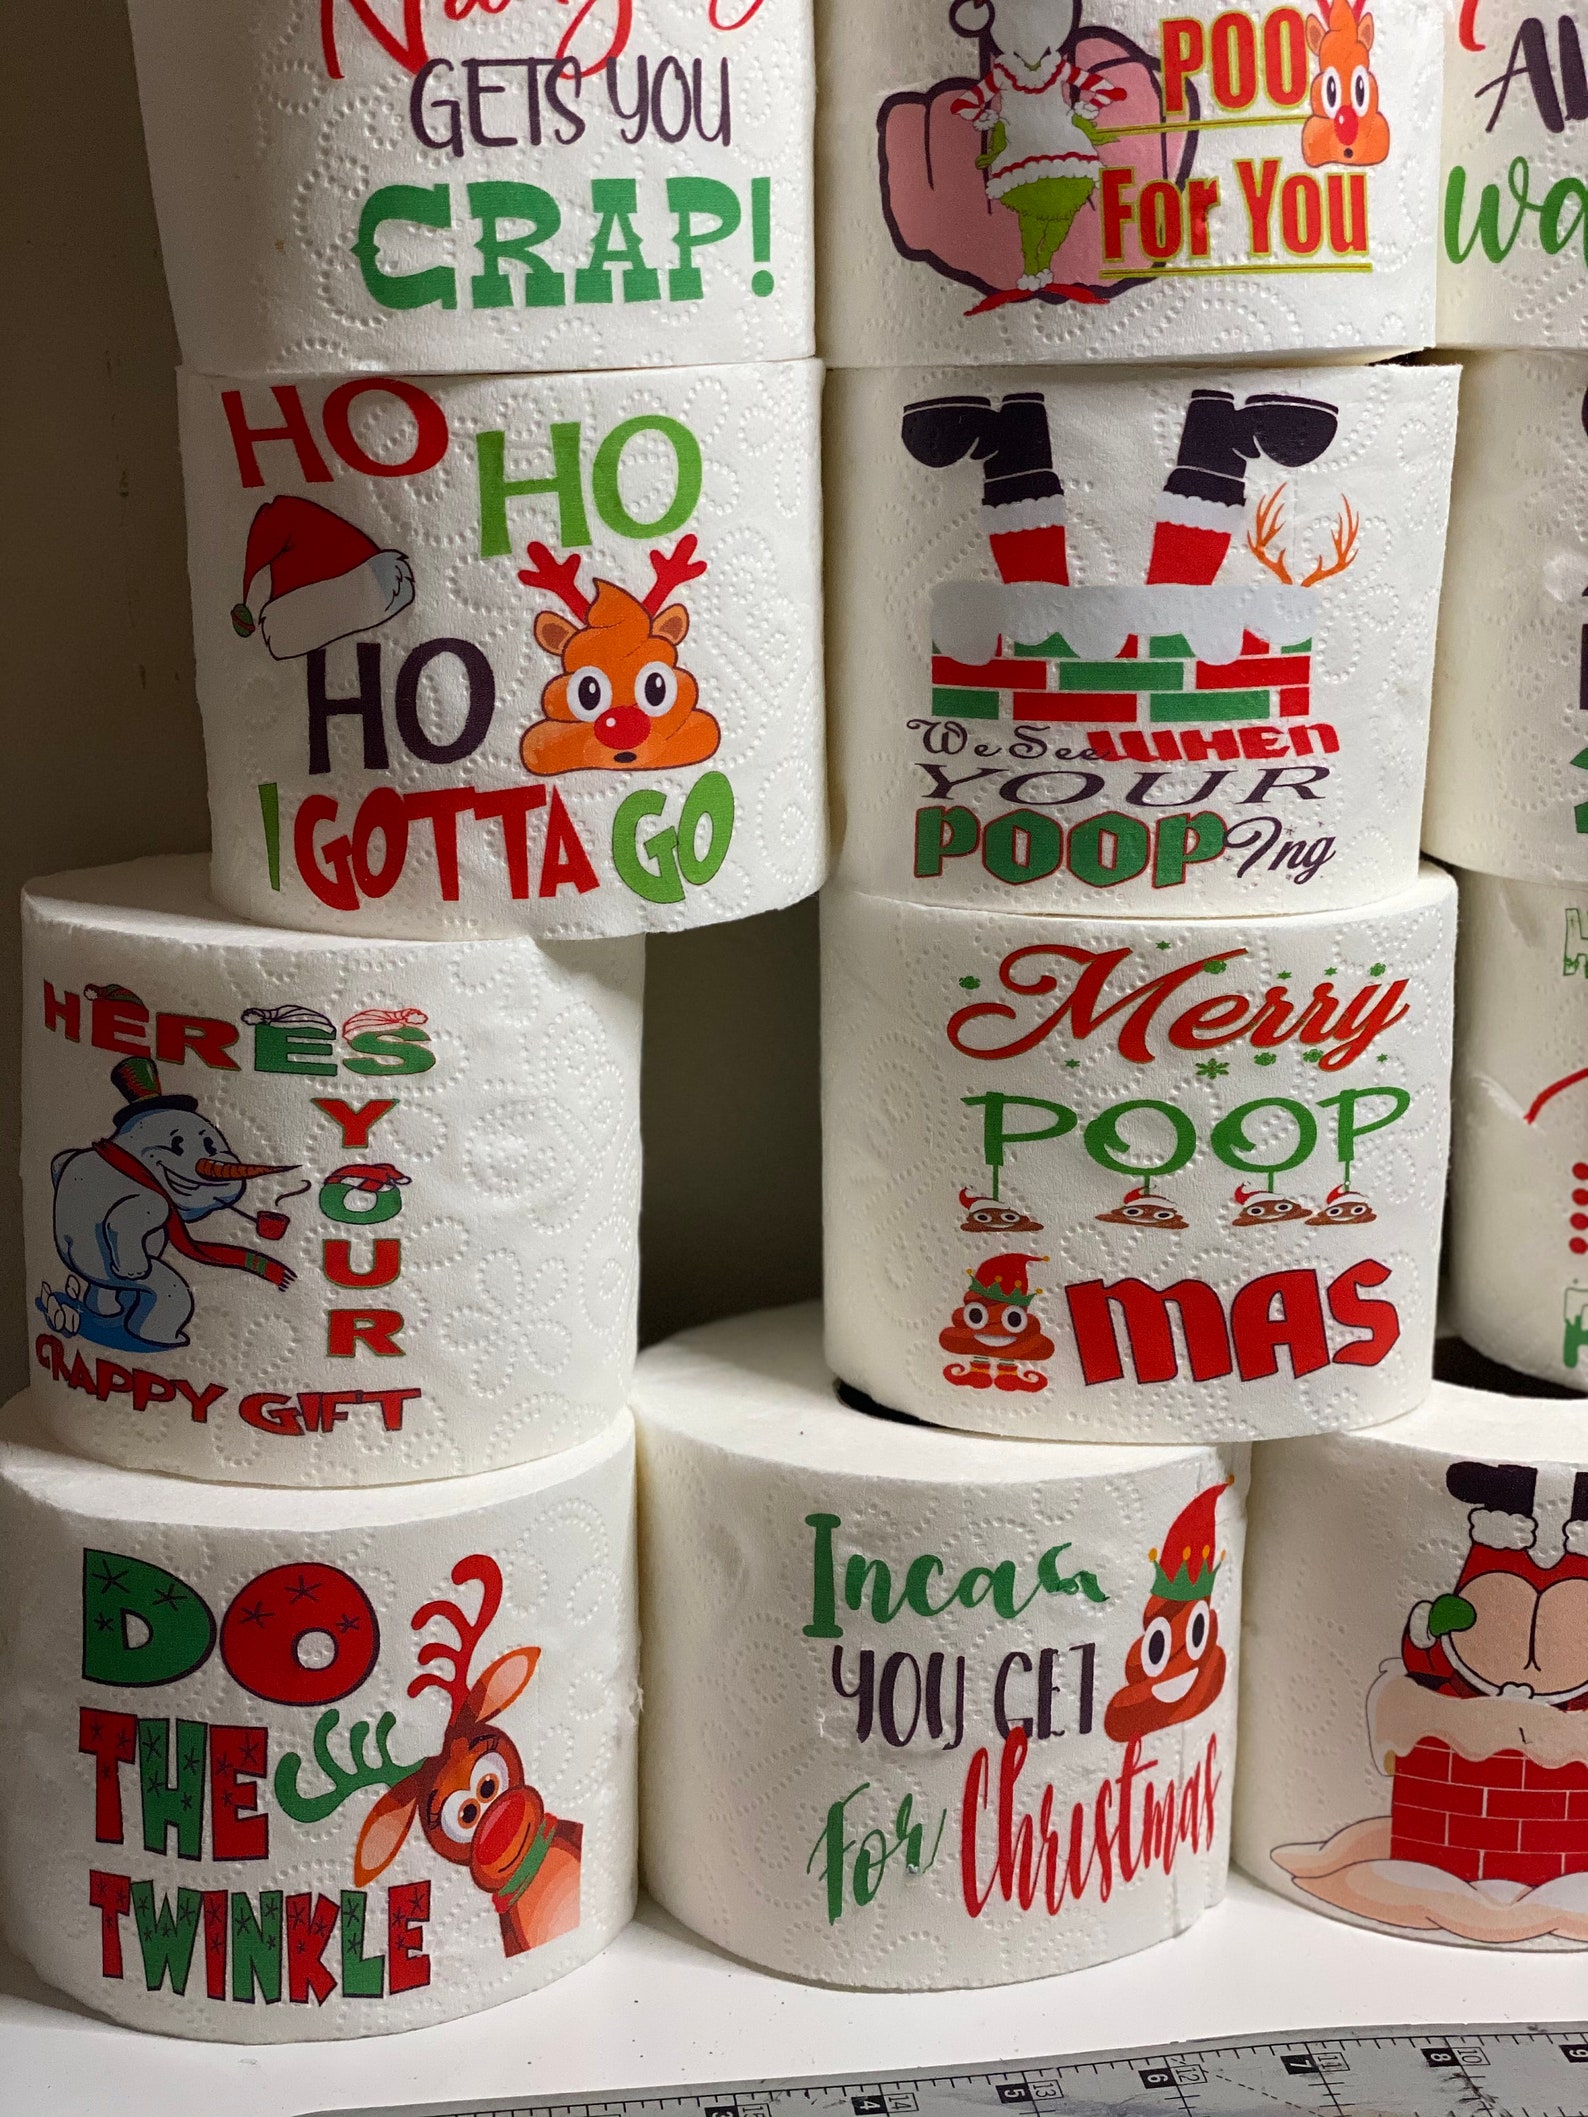 Big collection of toilet paper with Christmas illustrations.